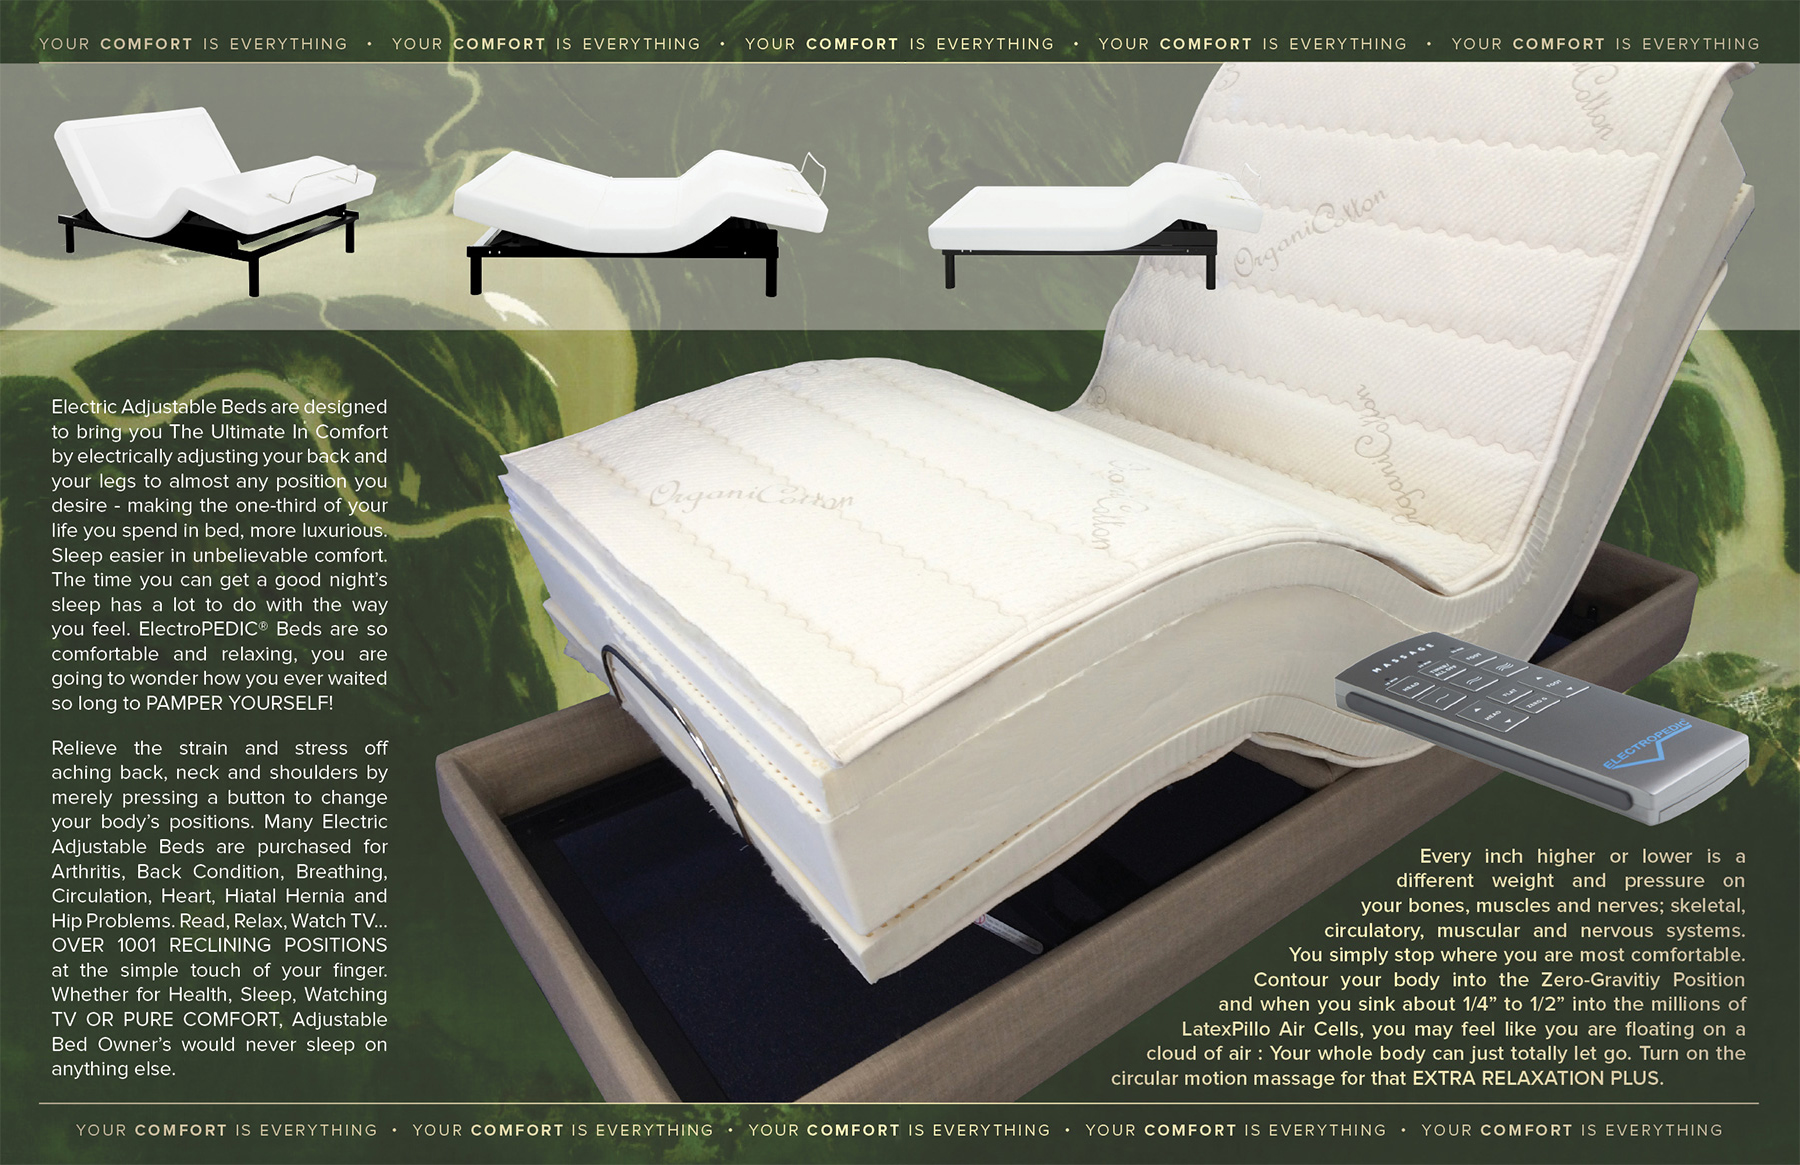 THE ULTIMATE in LA los angeles latex-pedic natural organic pure certified cotton and wool mattresses